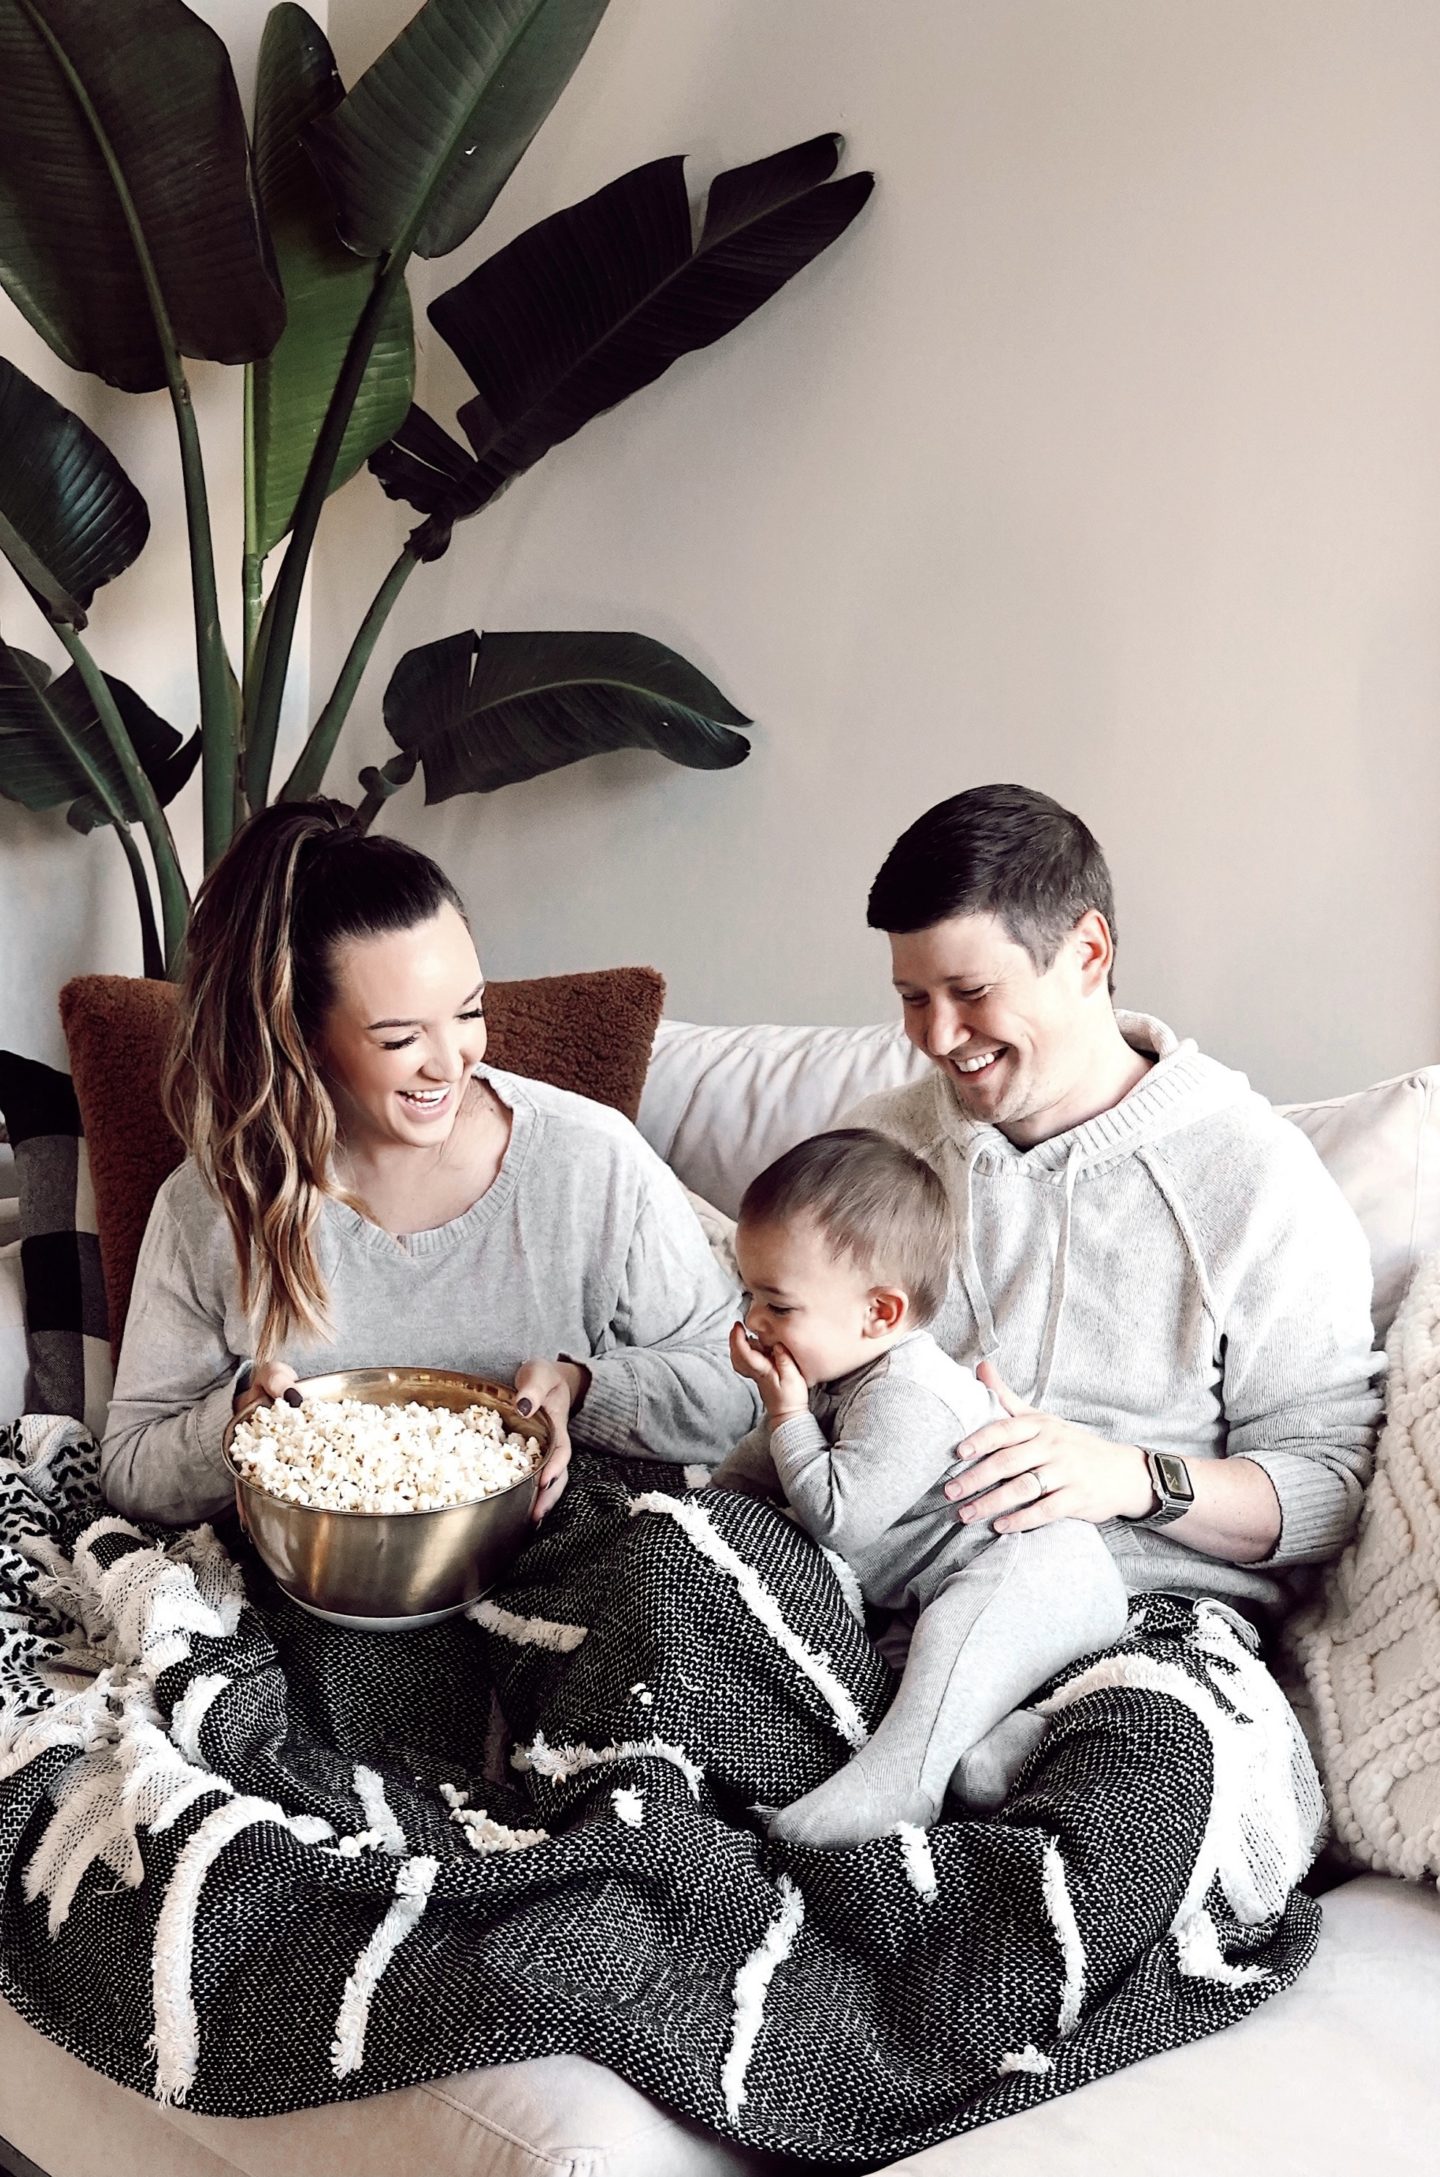 minted holiday cards 2020 |Minted Christmas Cards by popular San Francisco lifestyle blog, Just Add Glam: image of a mom and dad sitting on a couch with their young son while eating a bowl of popcorn. 